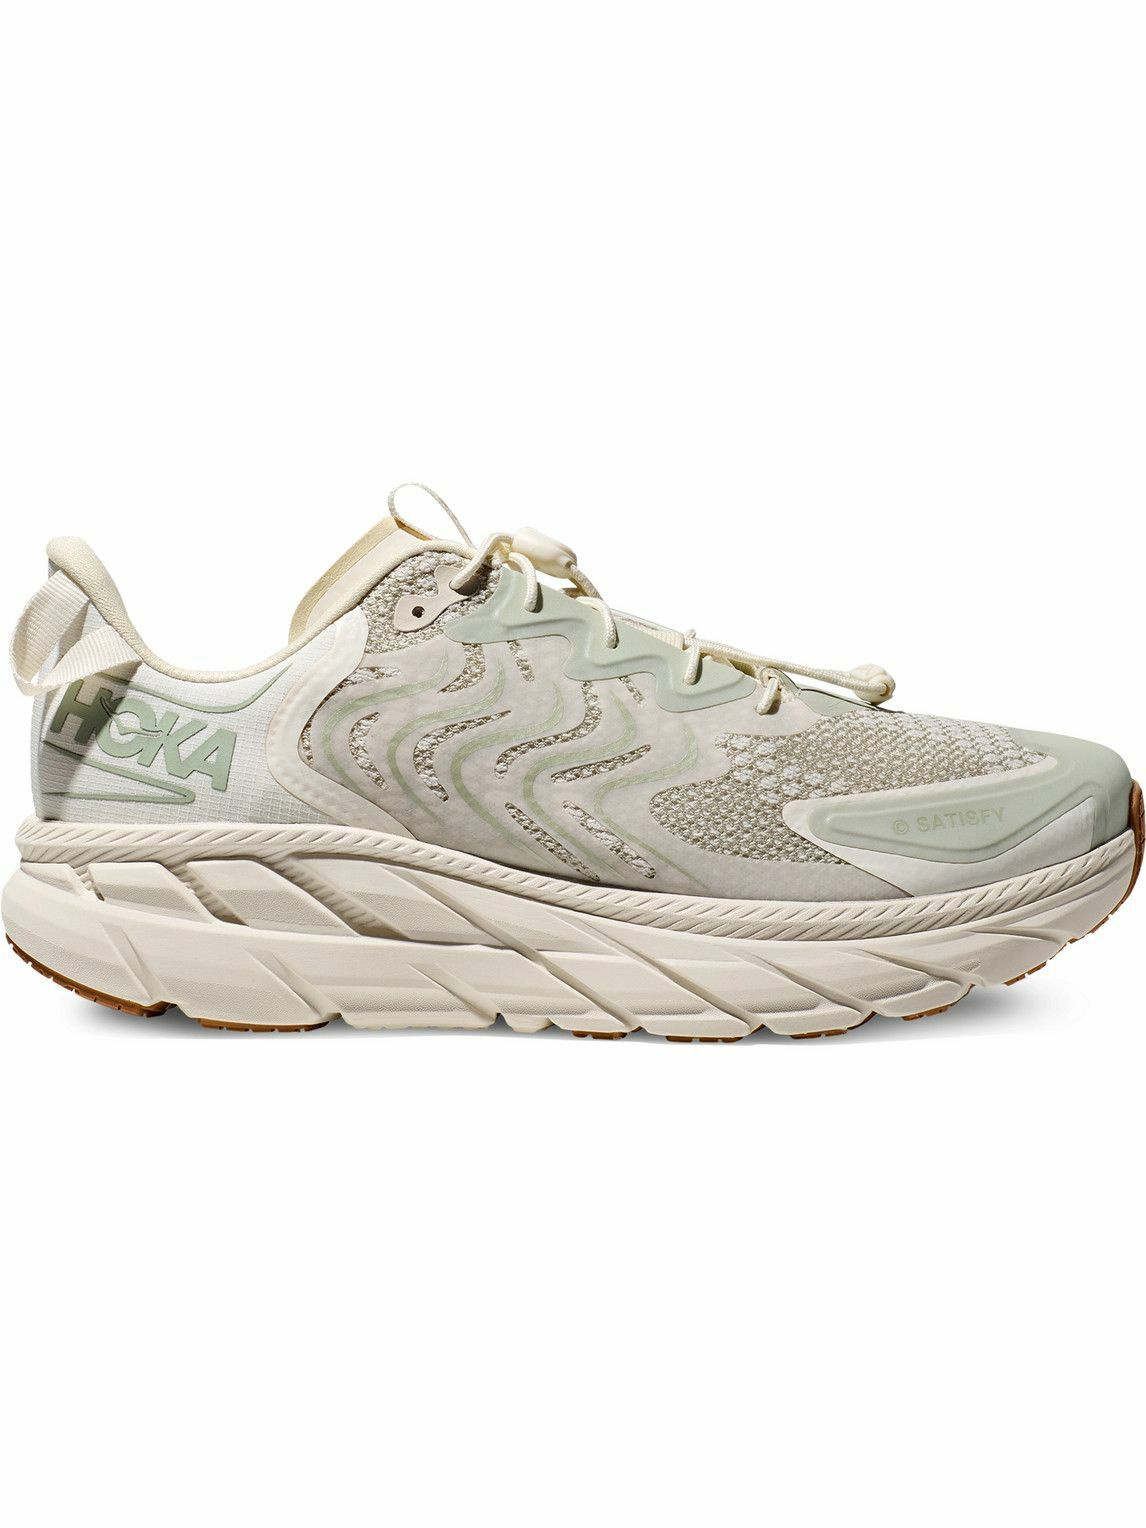 Hoka One One - Satisfy Clifton LS Rubber-Trimmed Mesh Sneakers - White ...